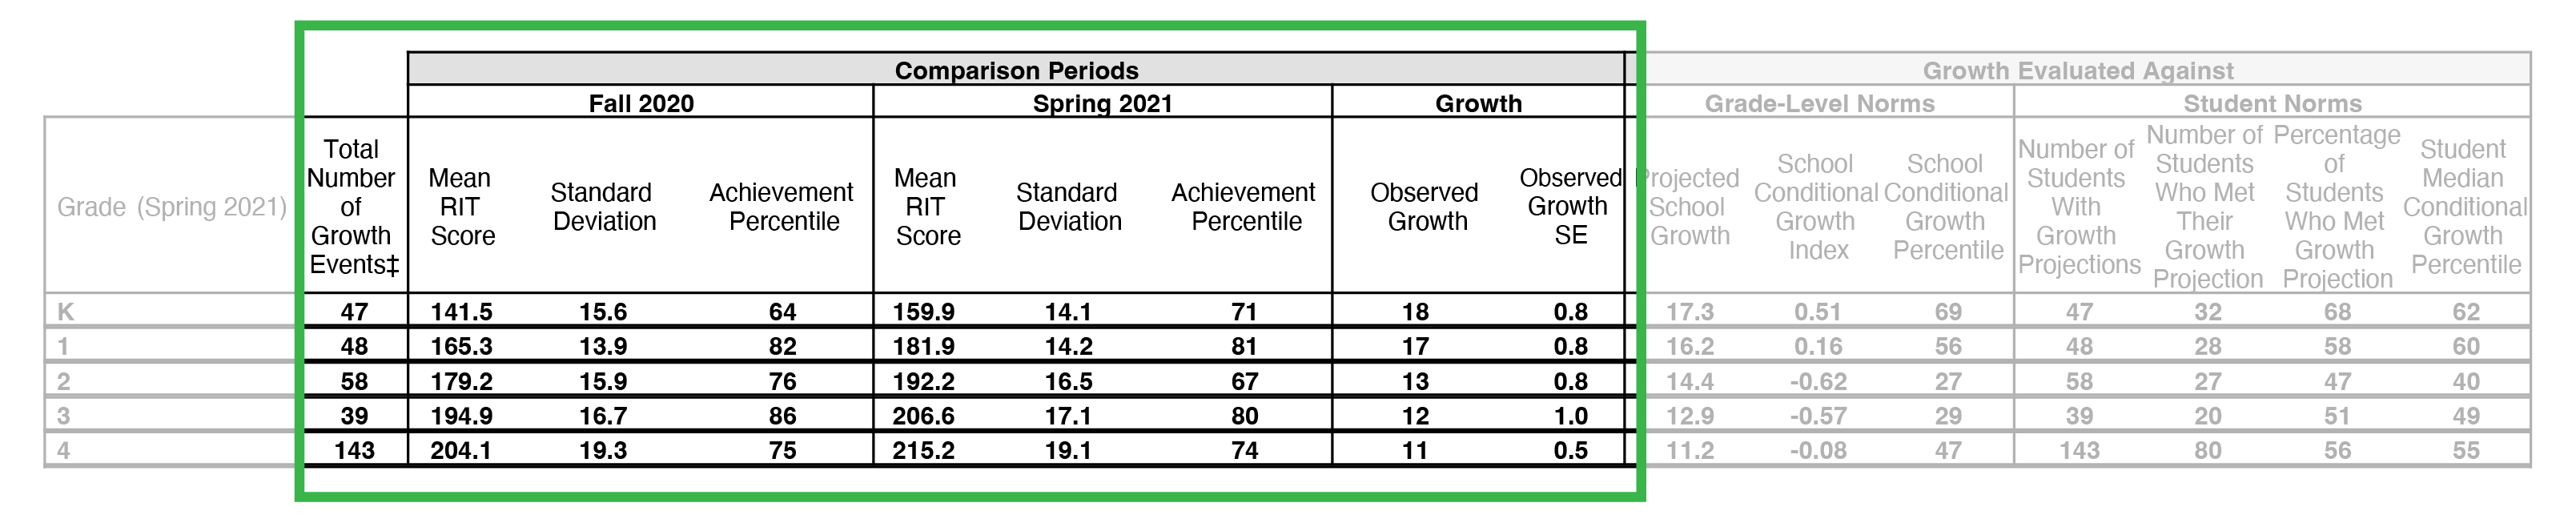 Example screenshot of the Comparison Periods section of the Student Growth Summary report.